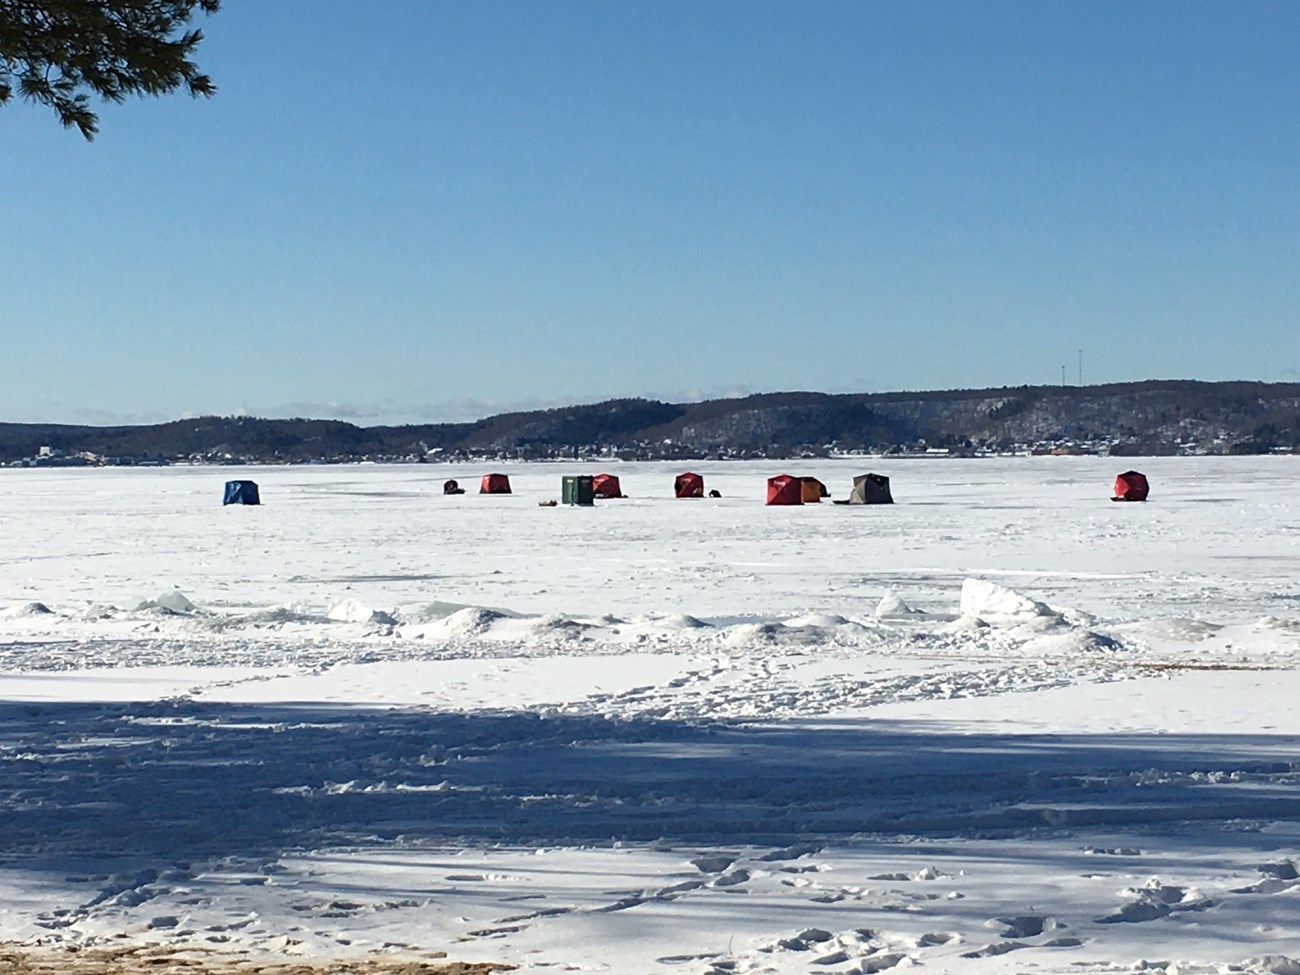 Eight fishing shacks on the ice of a large bay on a sunny day under a blue sky